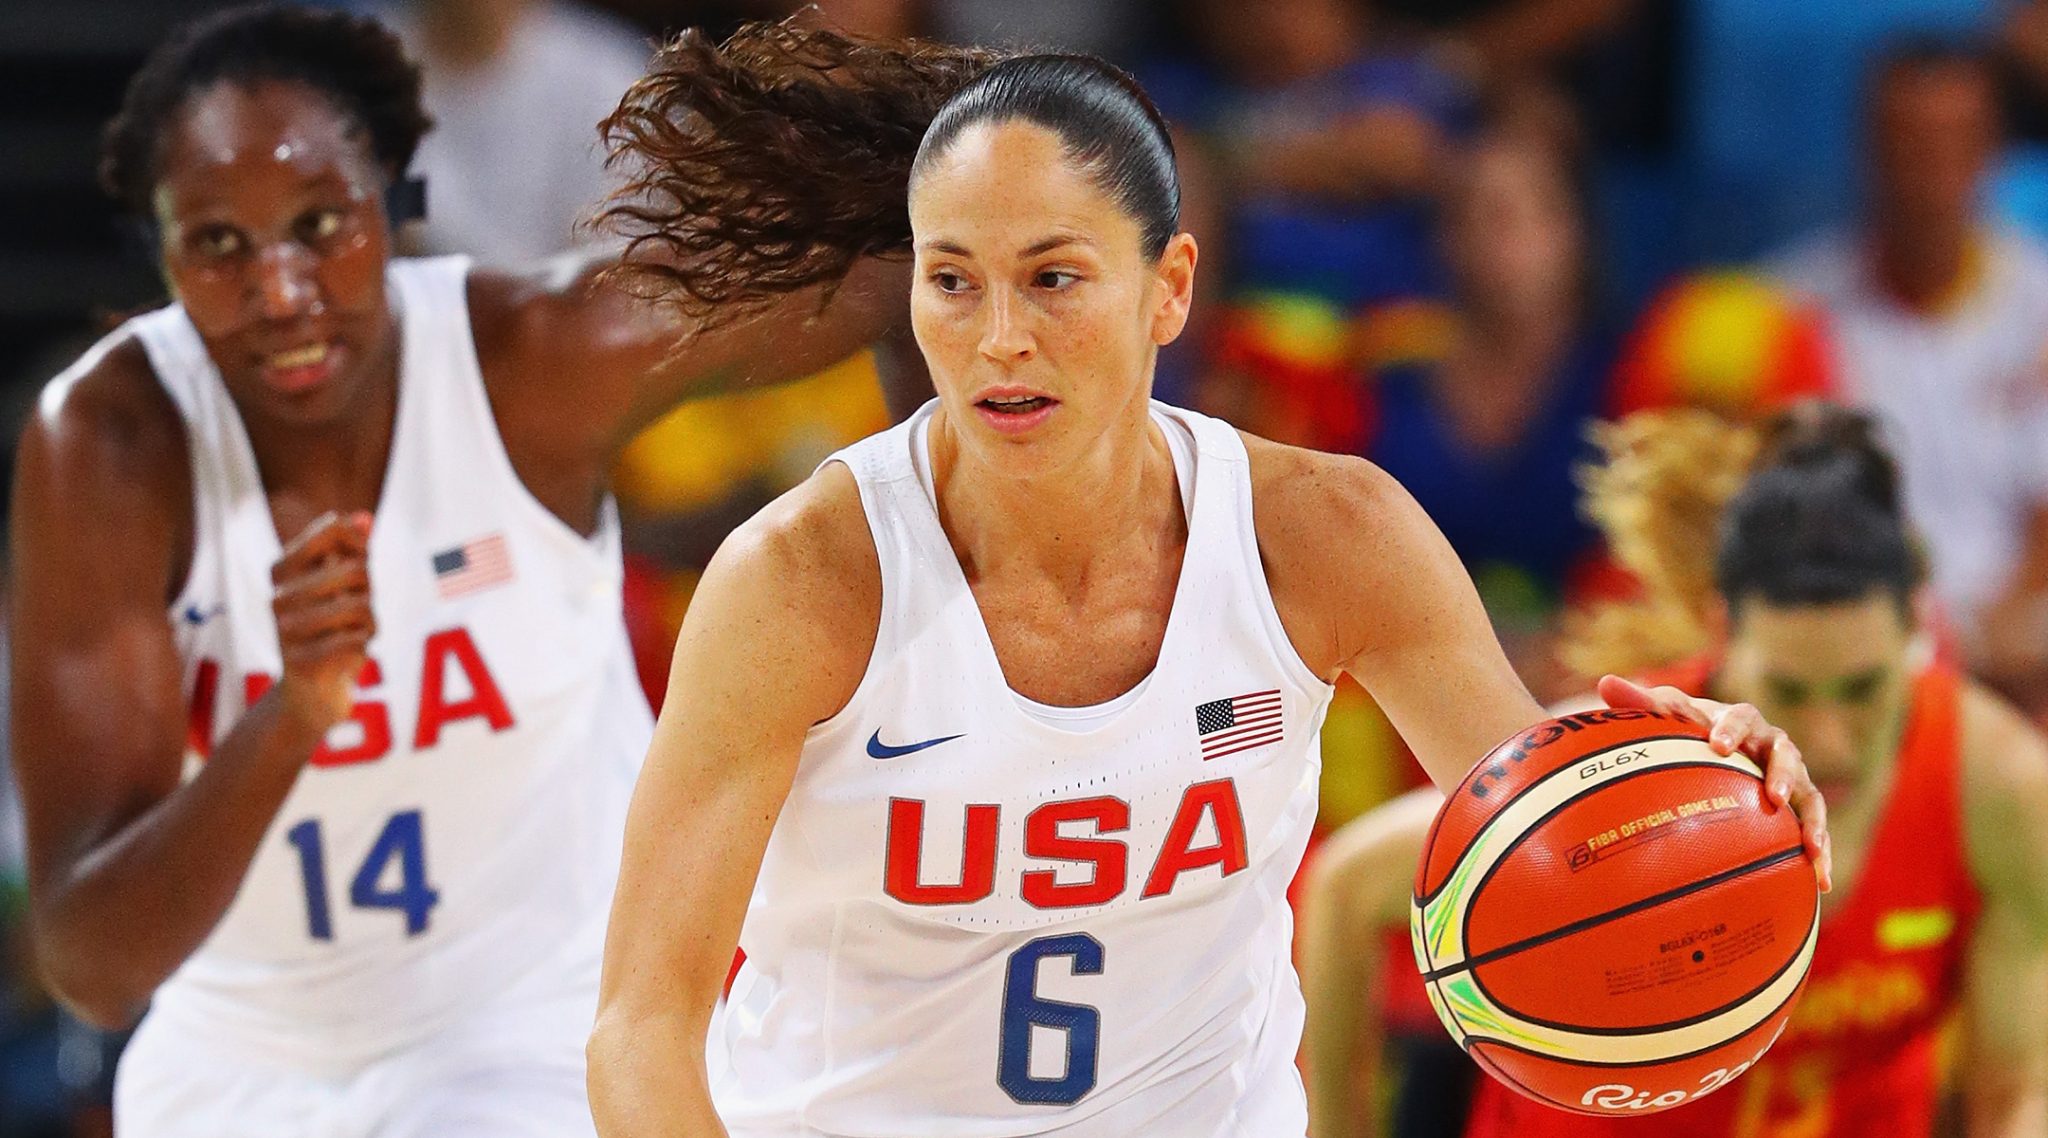 Jewish Women S Basketball Star To Be Us Flag Bearer At Olympics Opening Ceremony The Times Of Israel